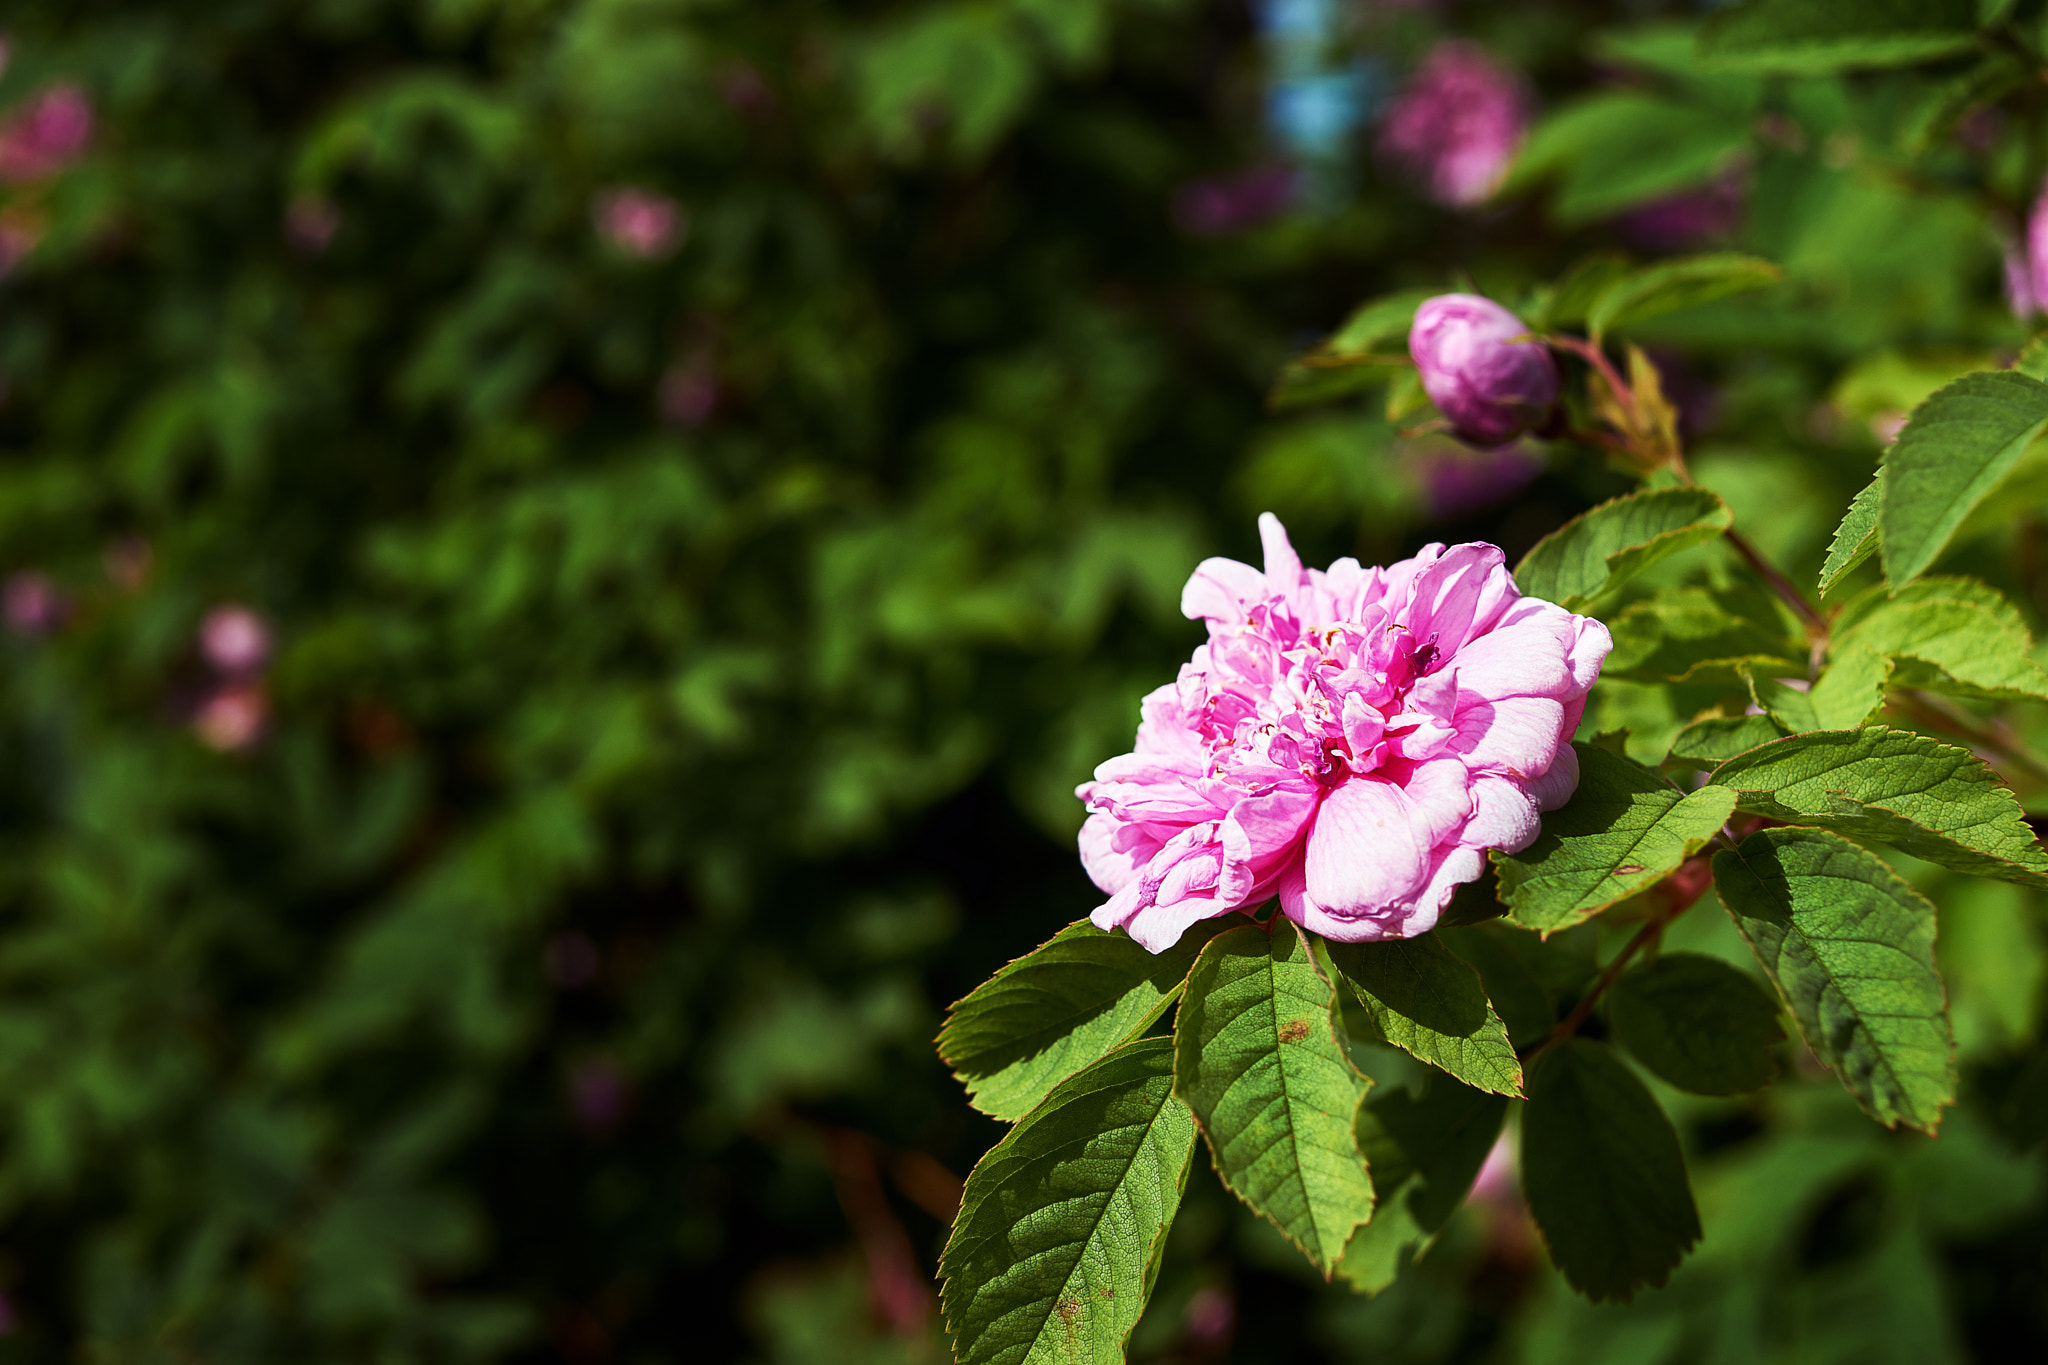 Sony a99 II sample photo. Almost rose photography